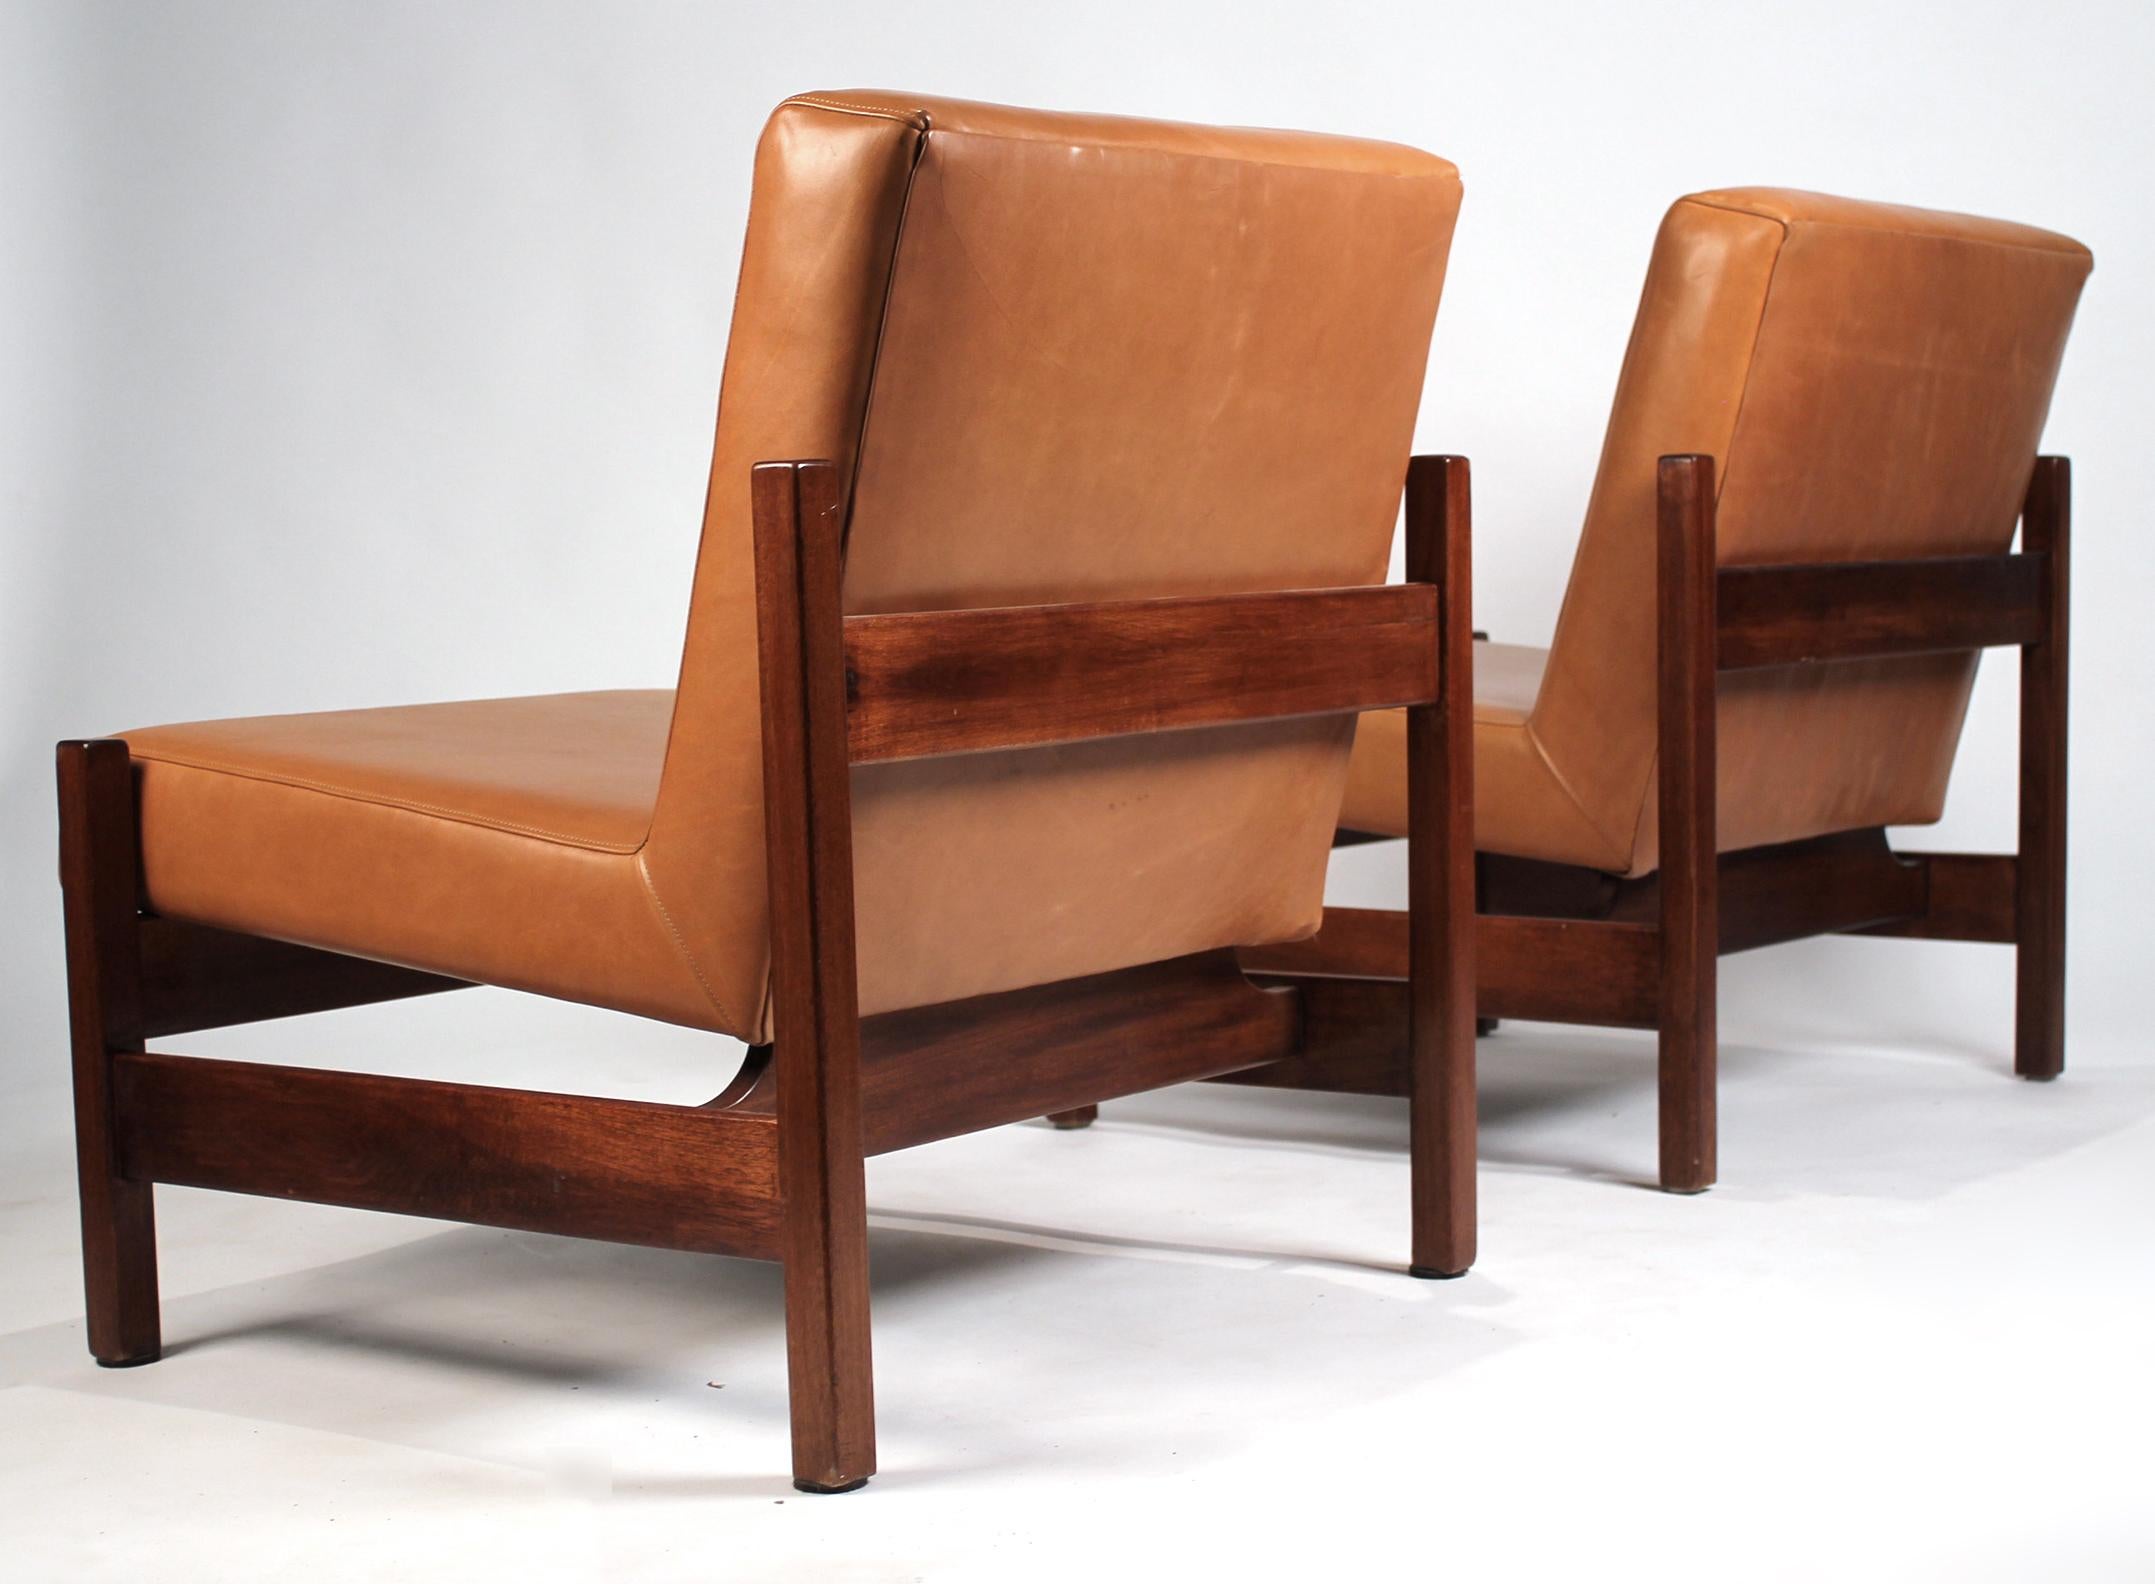 Mid-Century Modern Joaquim Tenreiro Style Peroba Lounge Chairs in leather for Knoll & Forma Brazil